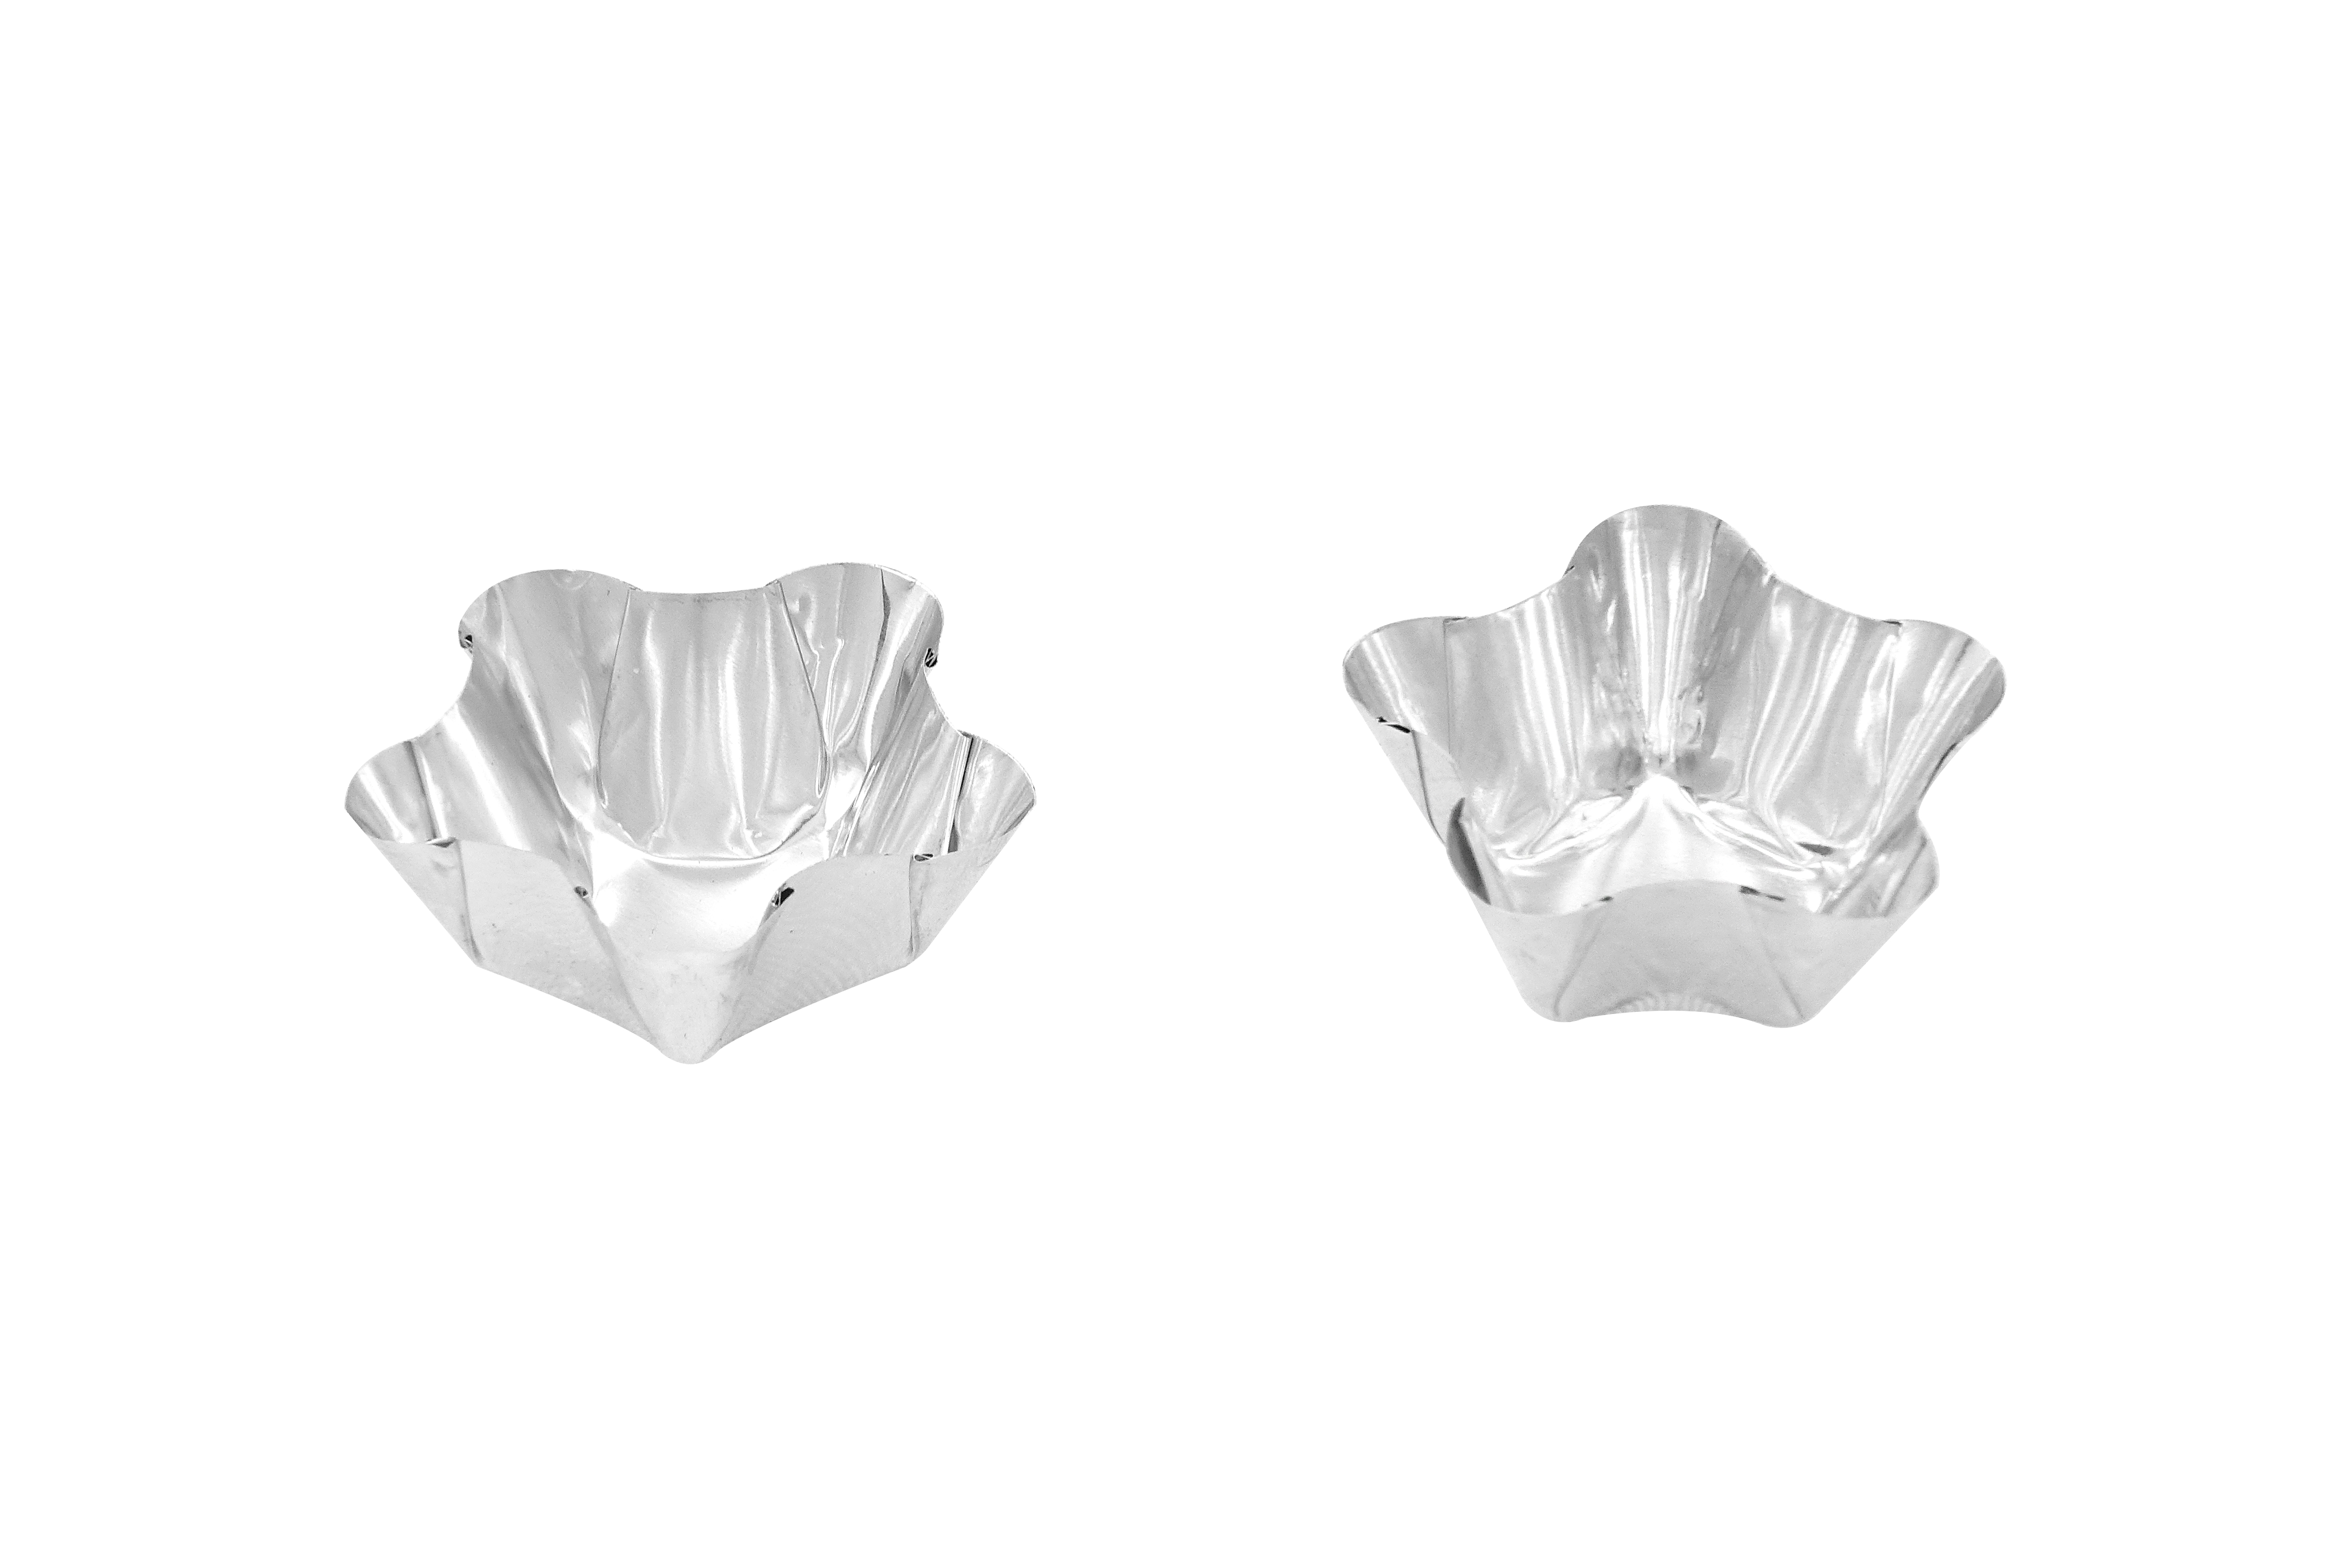 Best Price for 8×8 Aluminum Foil Pans With Lids - Alu Polygonal Container SP01 – Jiahua